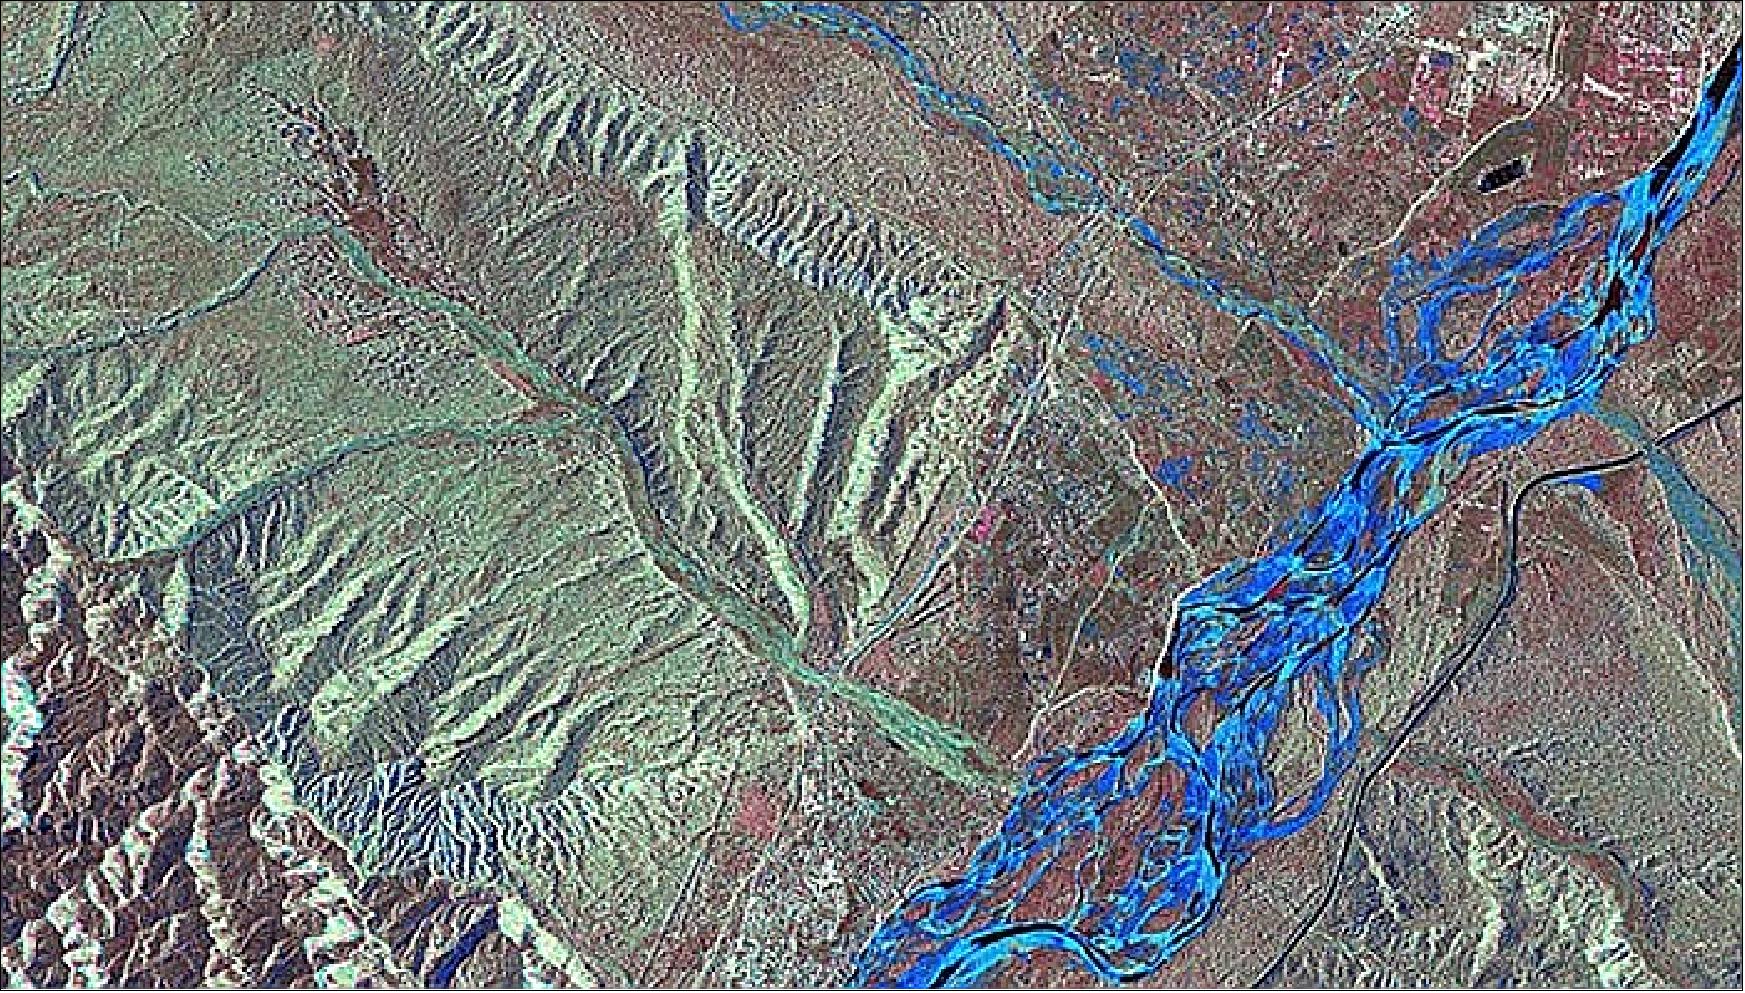 Figure 41: Observation of the June 2013 floods with TerraSAR-X in the North Indian states of Uttarakhand and Himachal Pradesh (image credit: DLR)